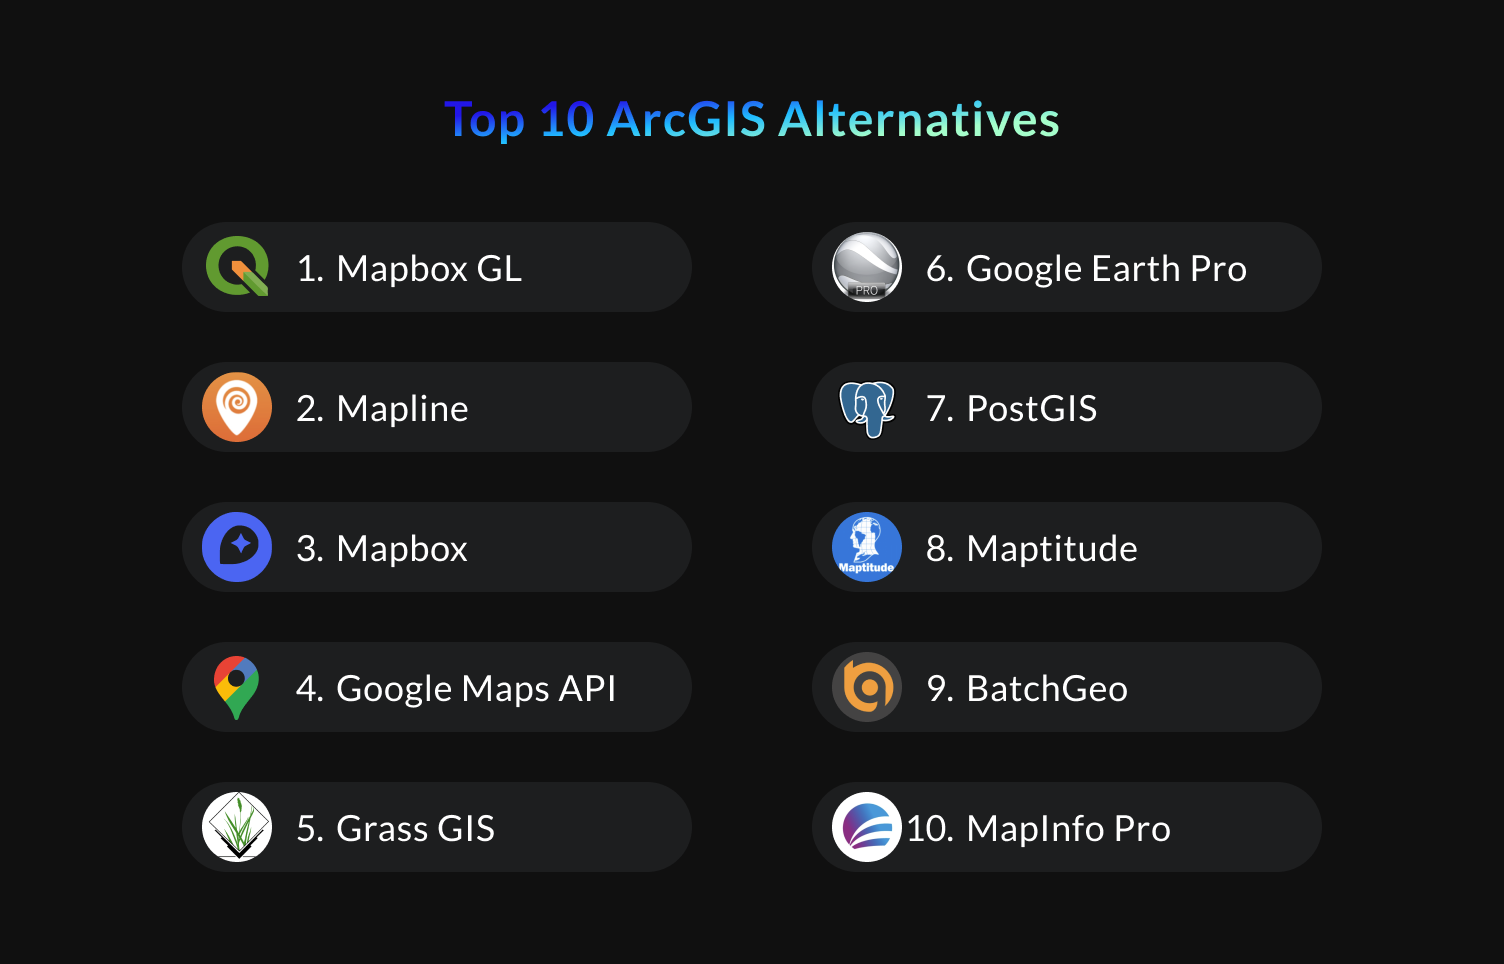 Best 10 ArcGIS Alternatives and Tips to Choose One